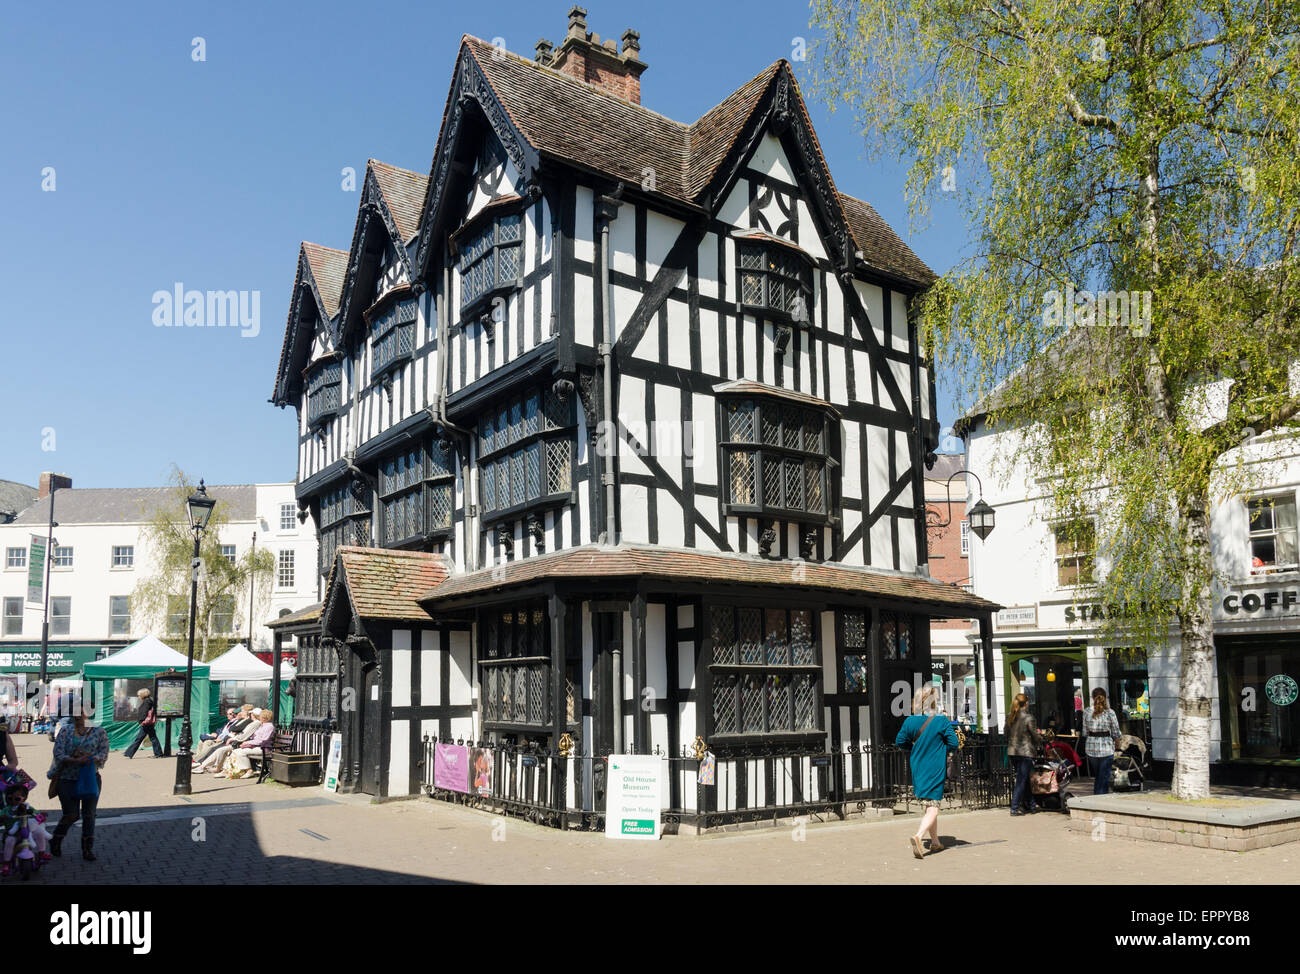 The Old House black and white half-timbered house in High Town, Hereford was built in 1621 and is now a museum Stock Photo